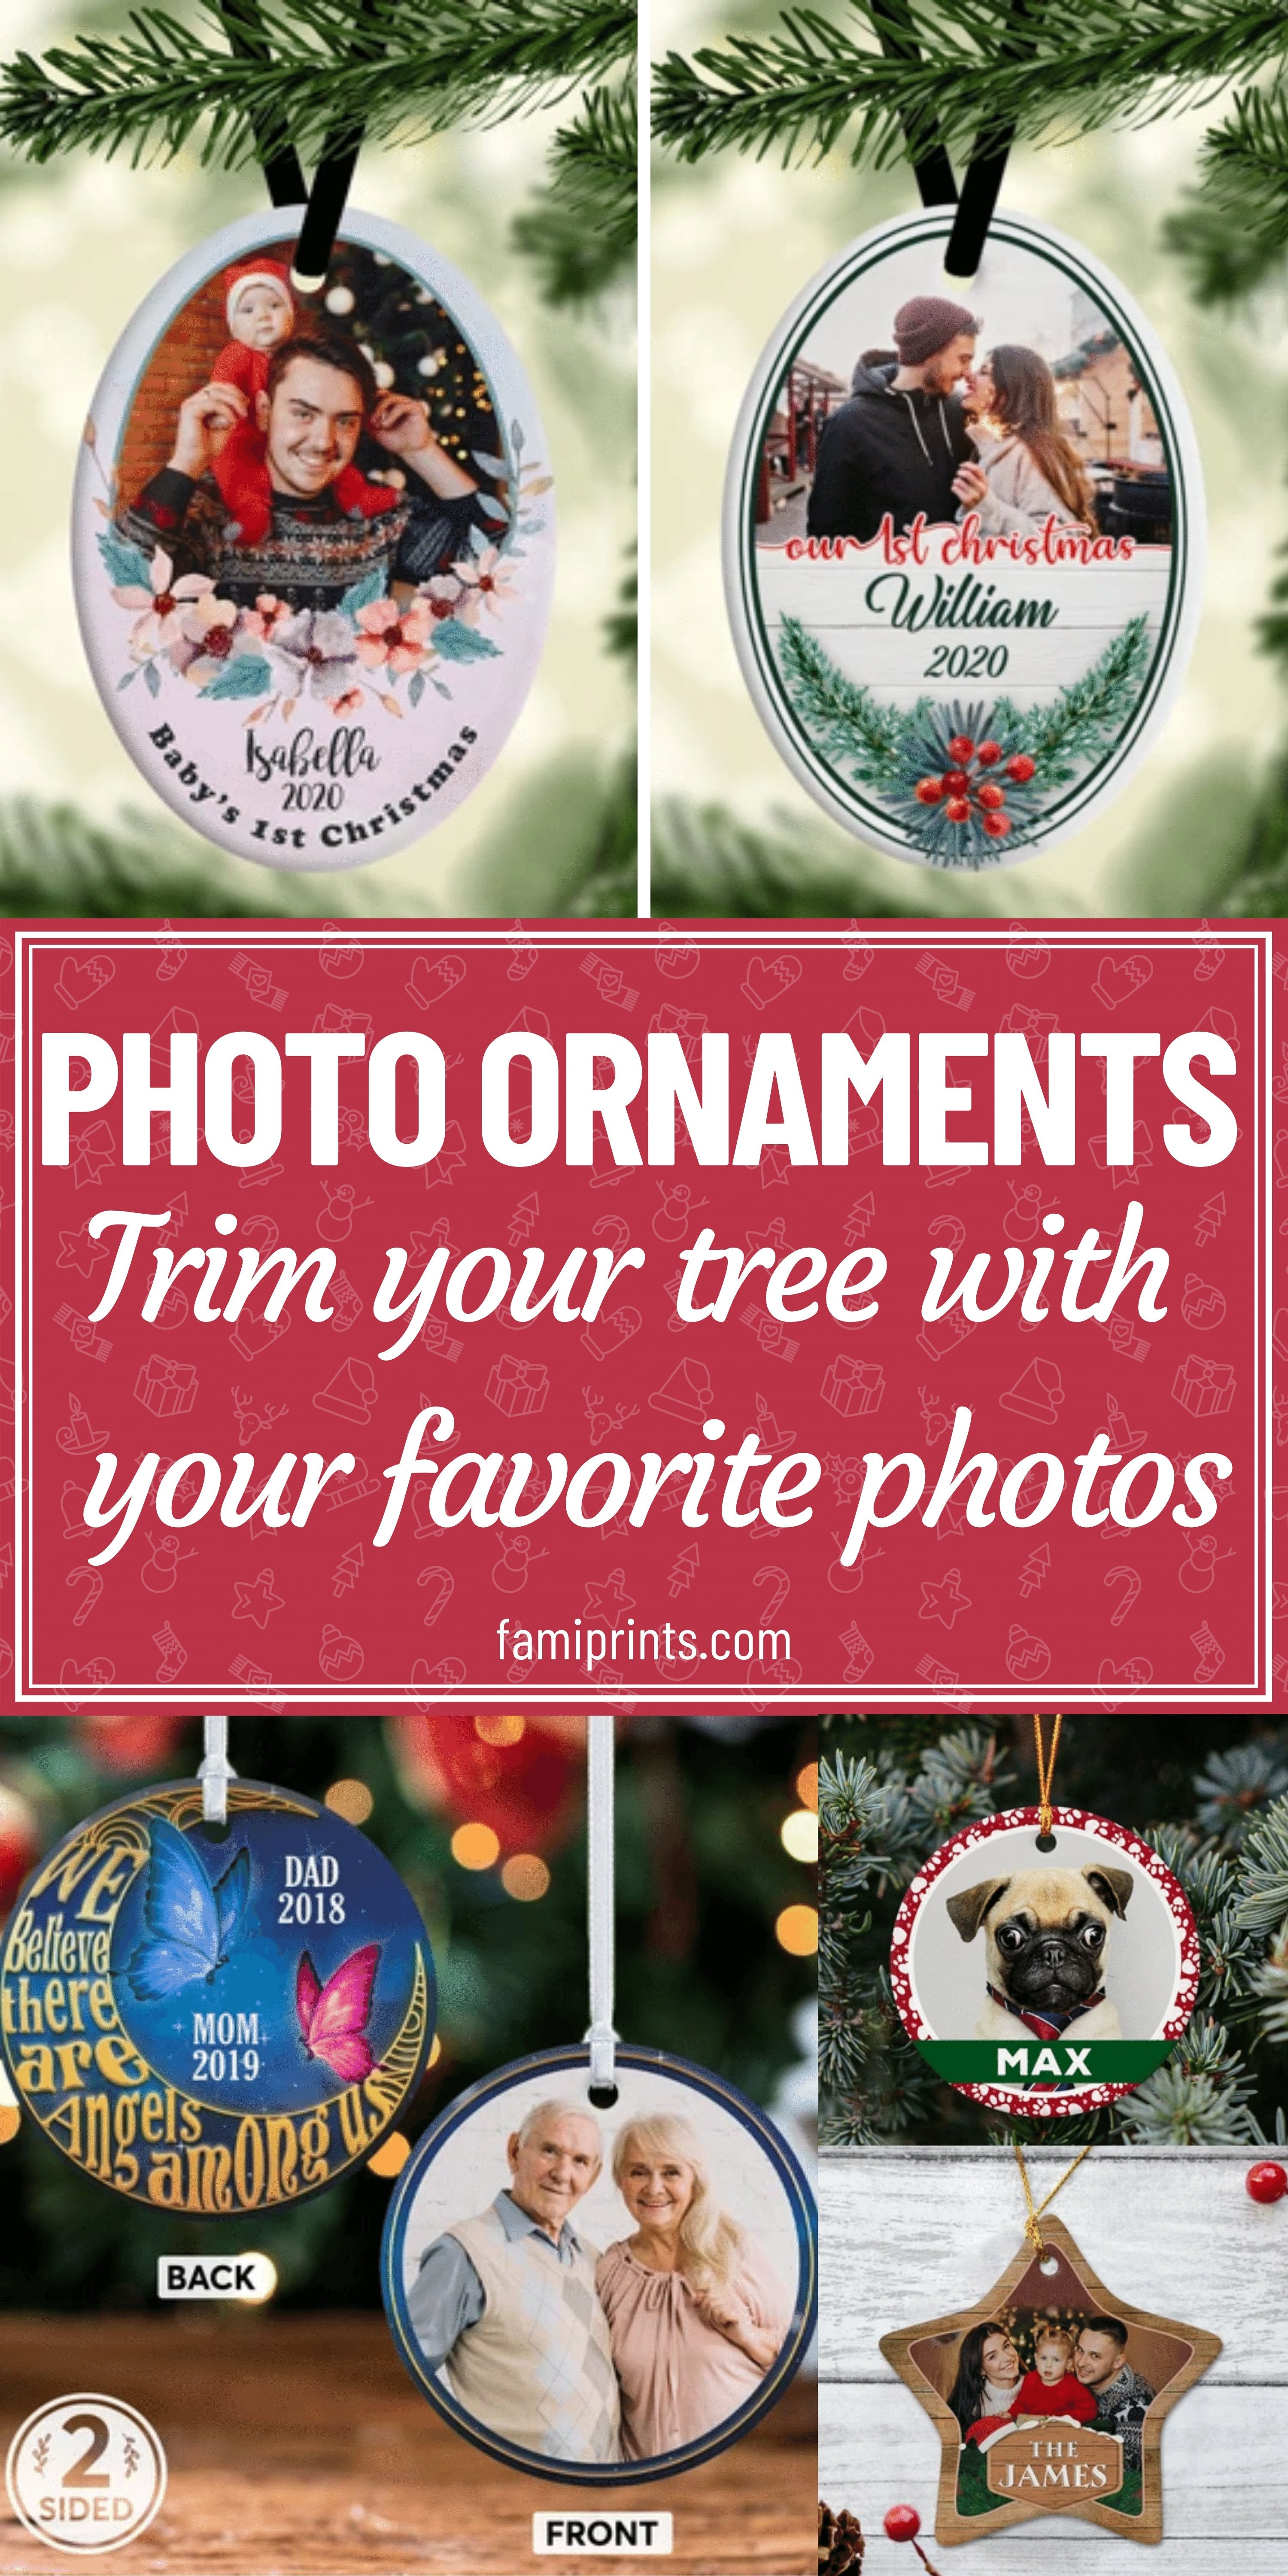 Personalized Photo Ornaments | FamiPrints | Trending Personalized Family Gifts